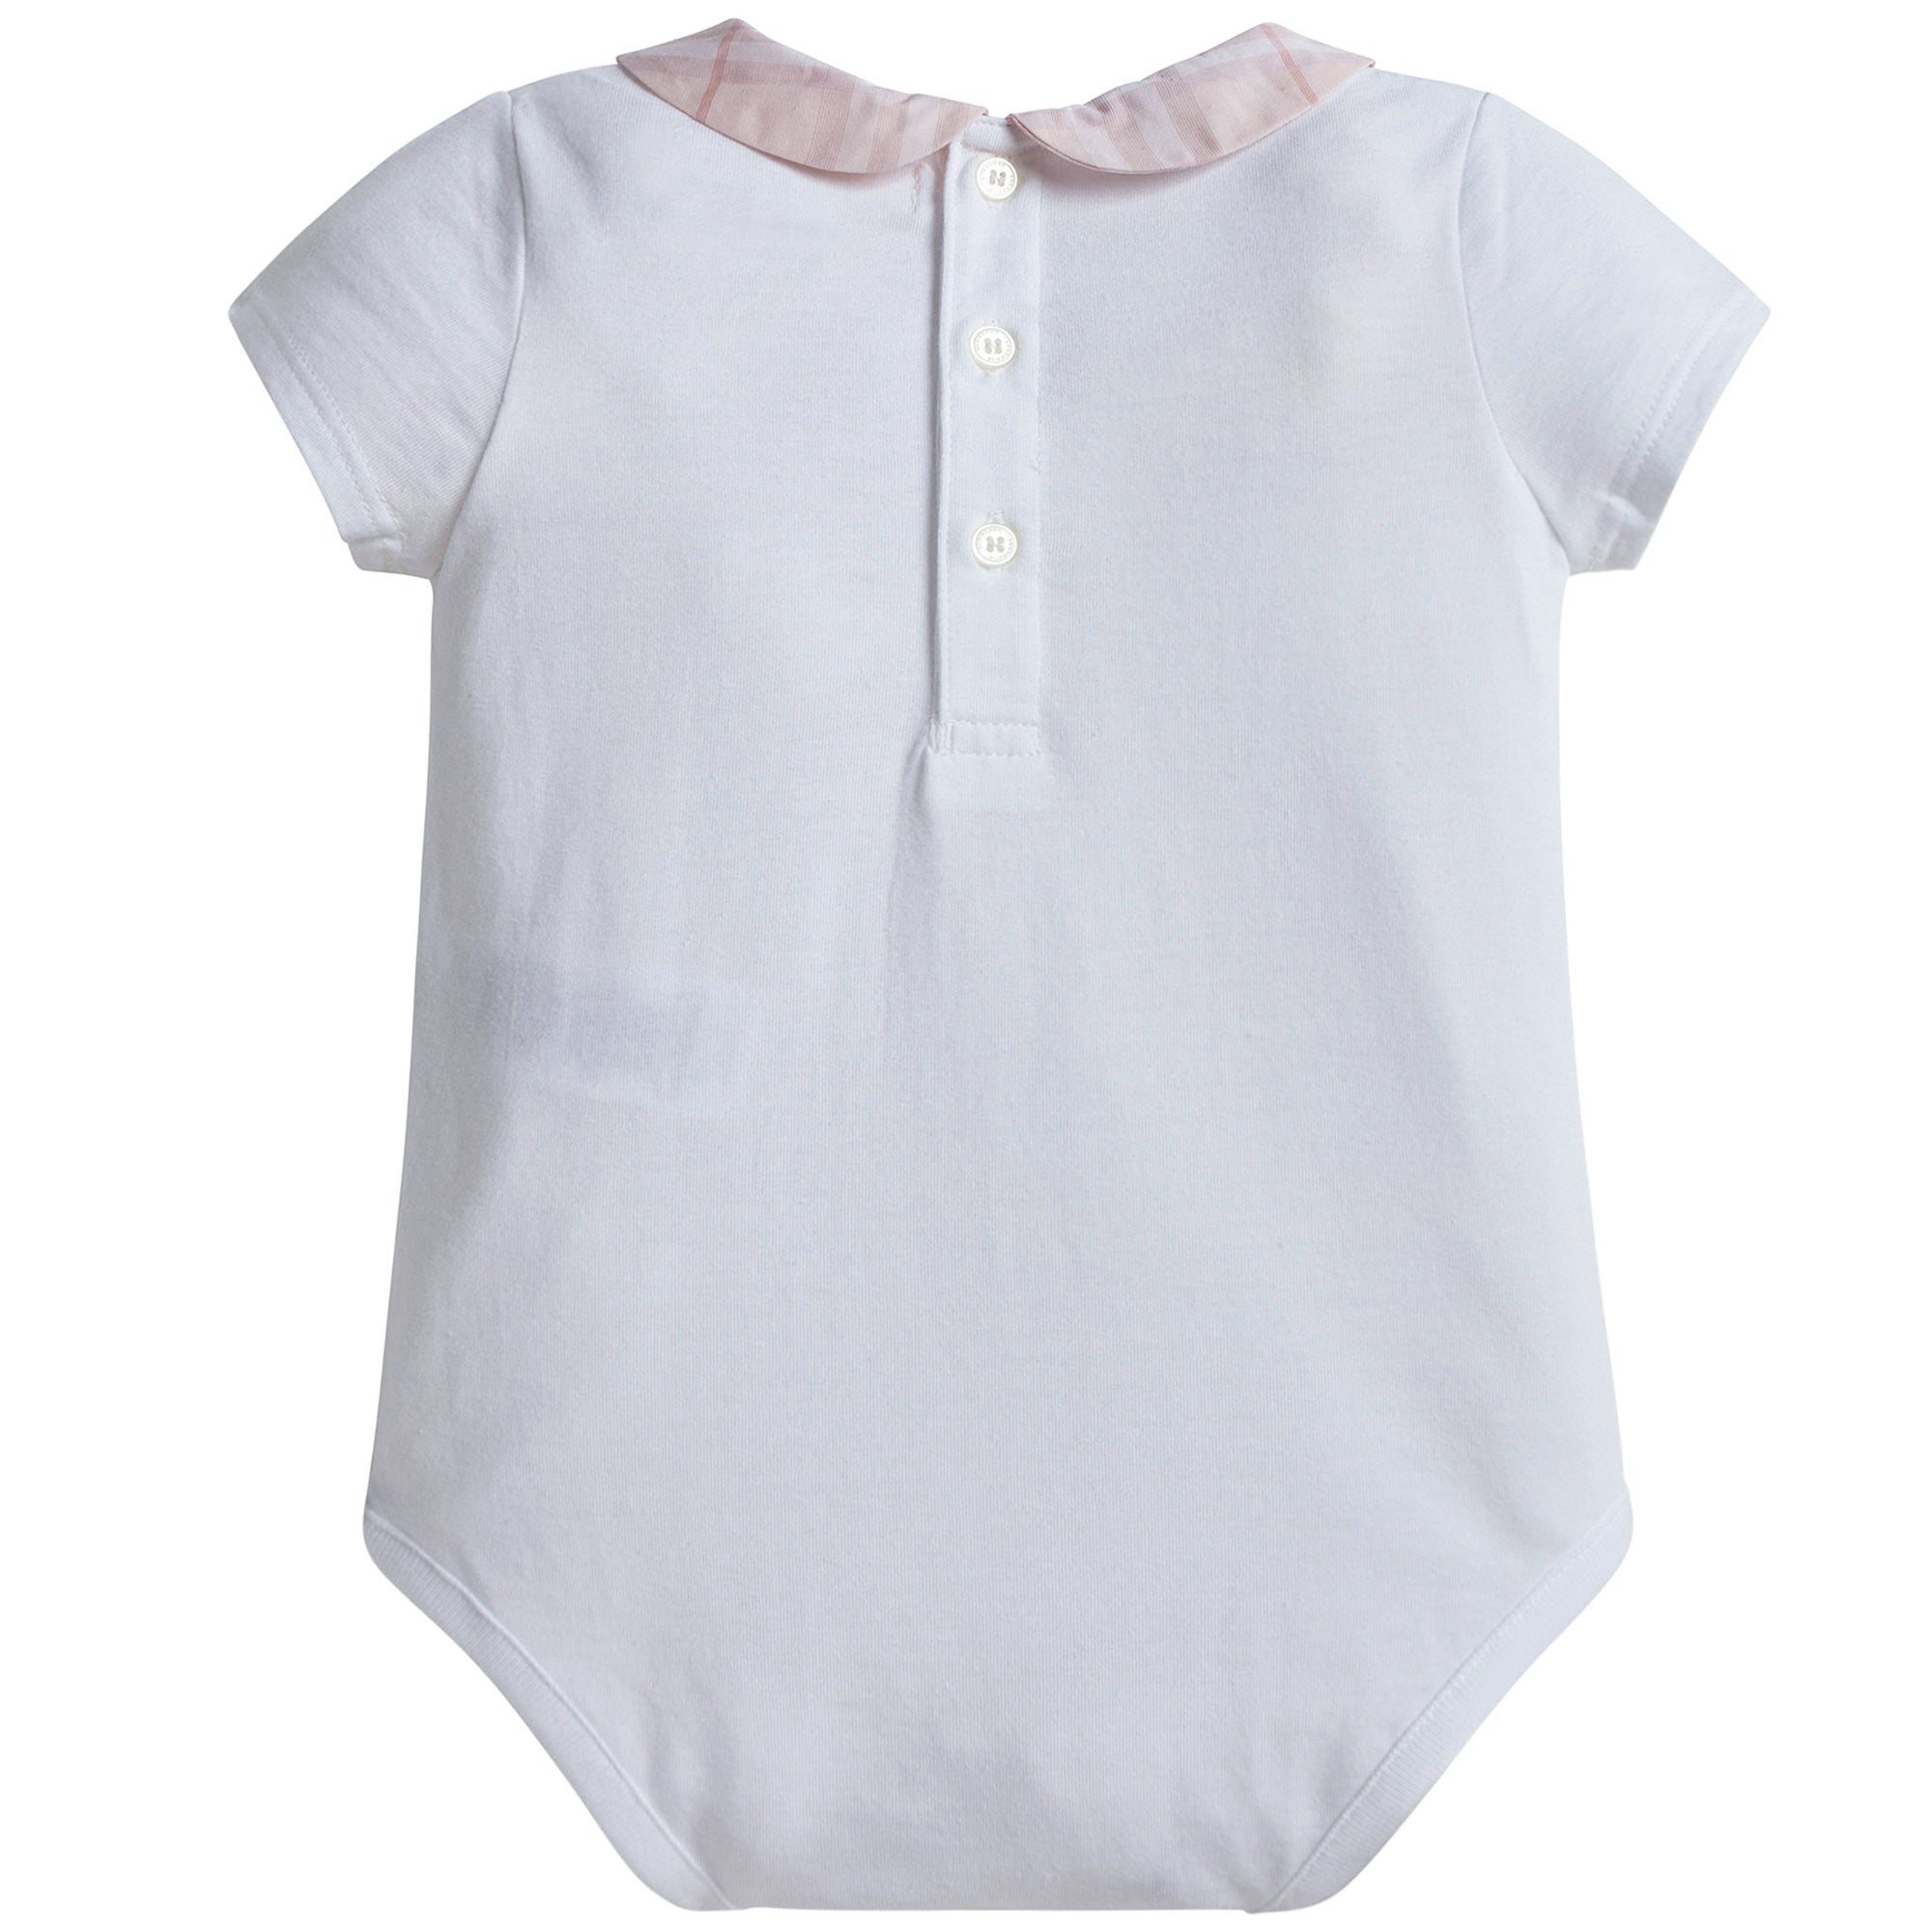 Baby Girls White Bodysuits With Pink Check Collar